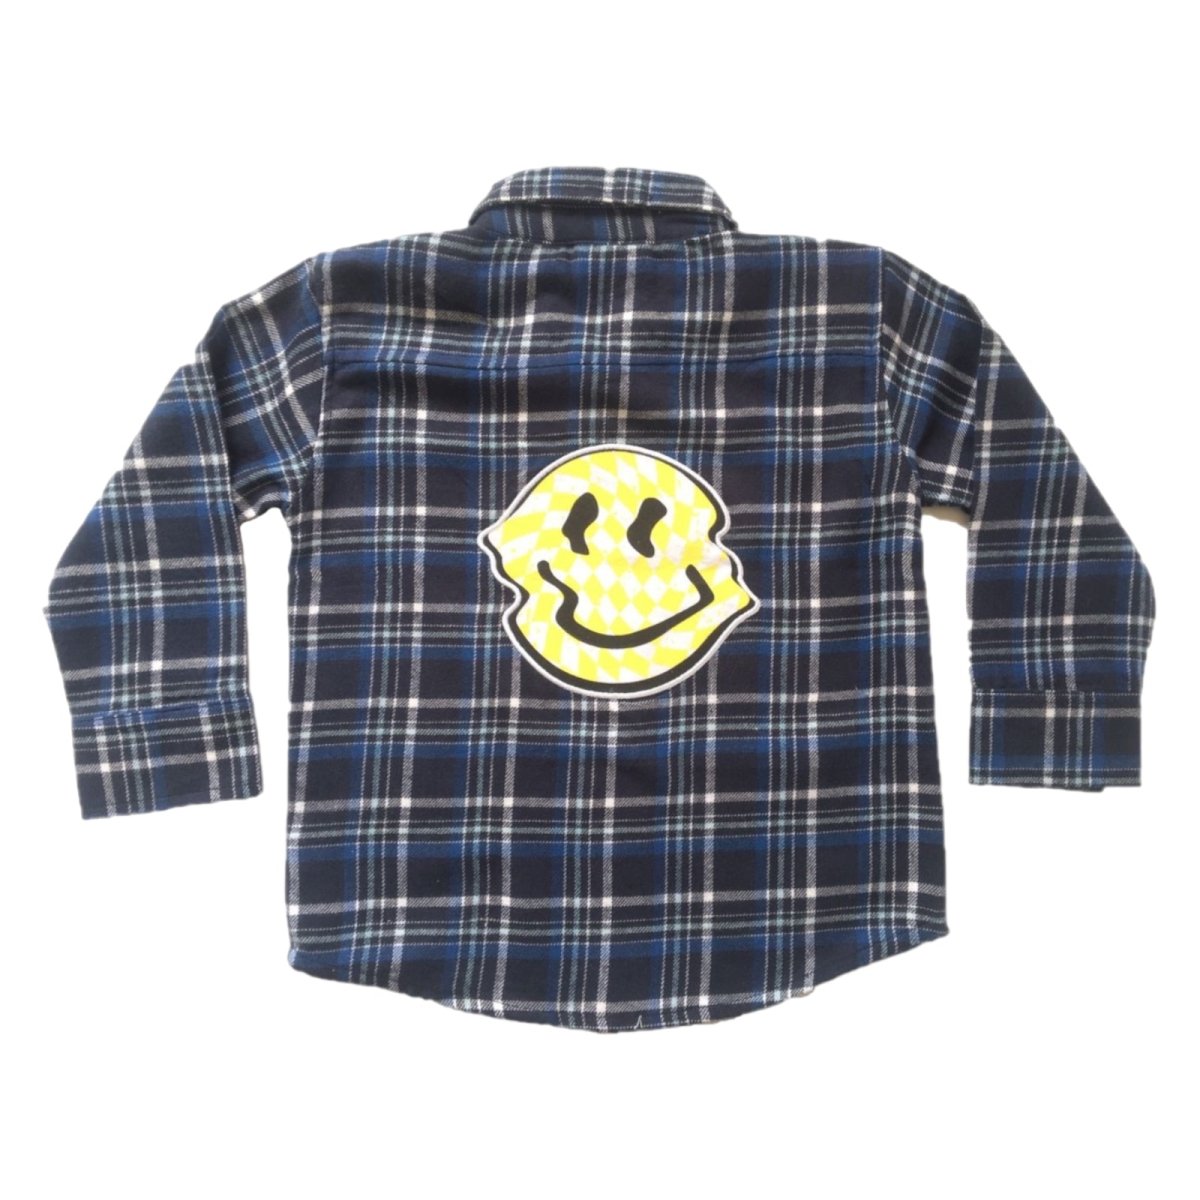 SMILEY FACE BUTTON DOWN FLANNEL - MISH MISH